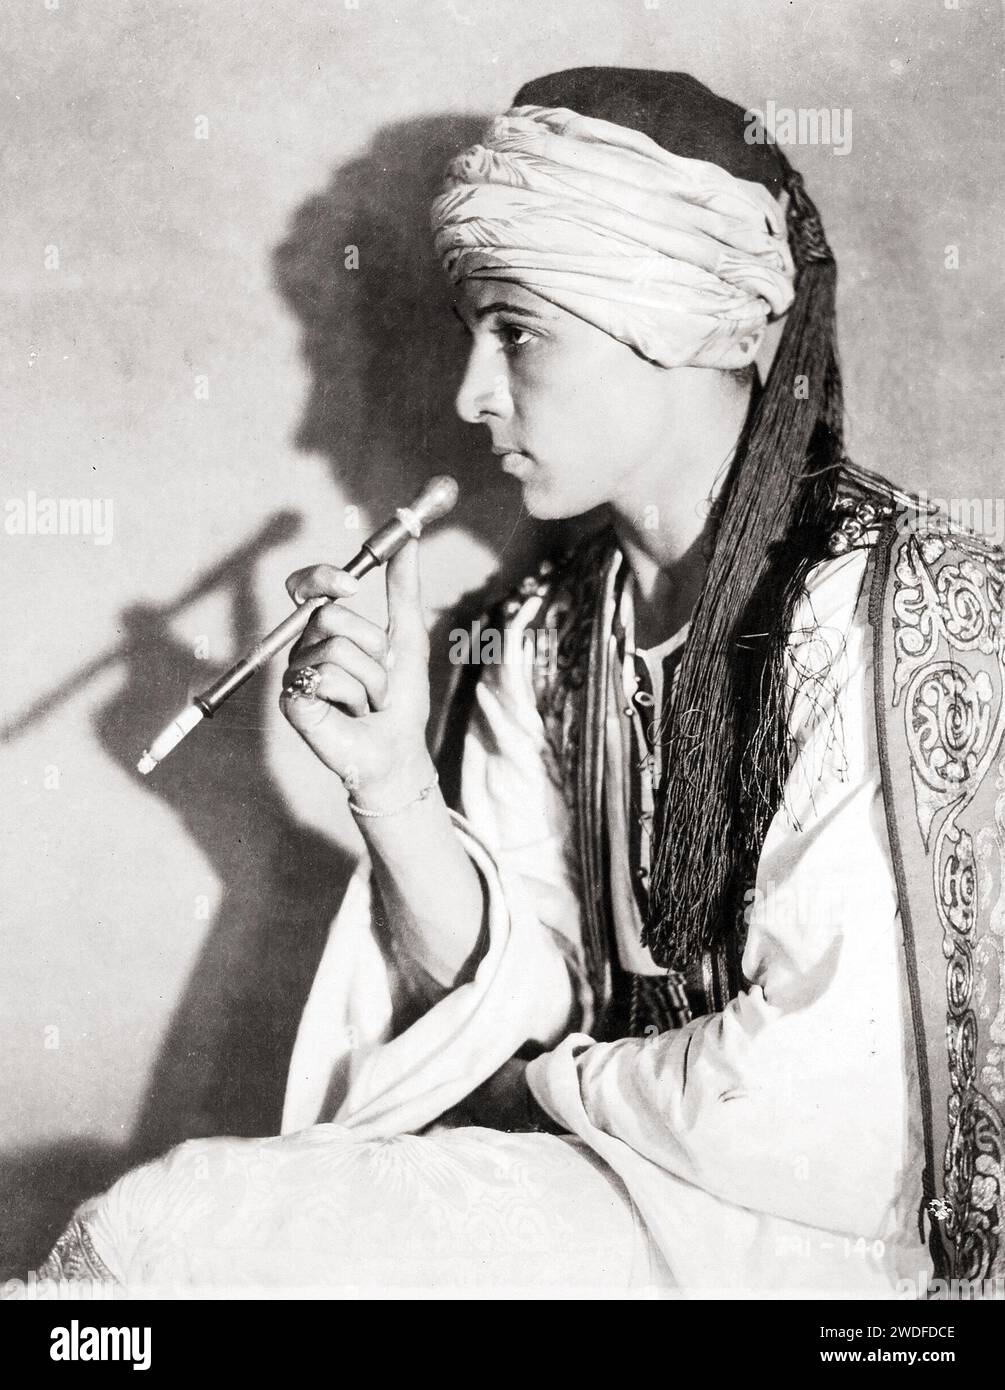 Rudolph Valentino in The Sheik - smoking and with turban, 1921 Stock Photo